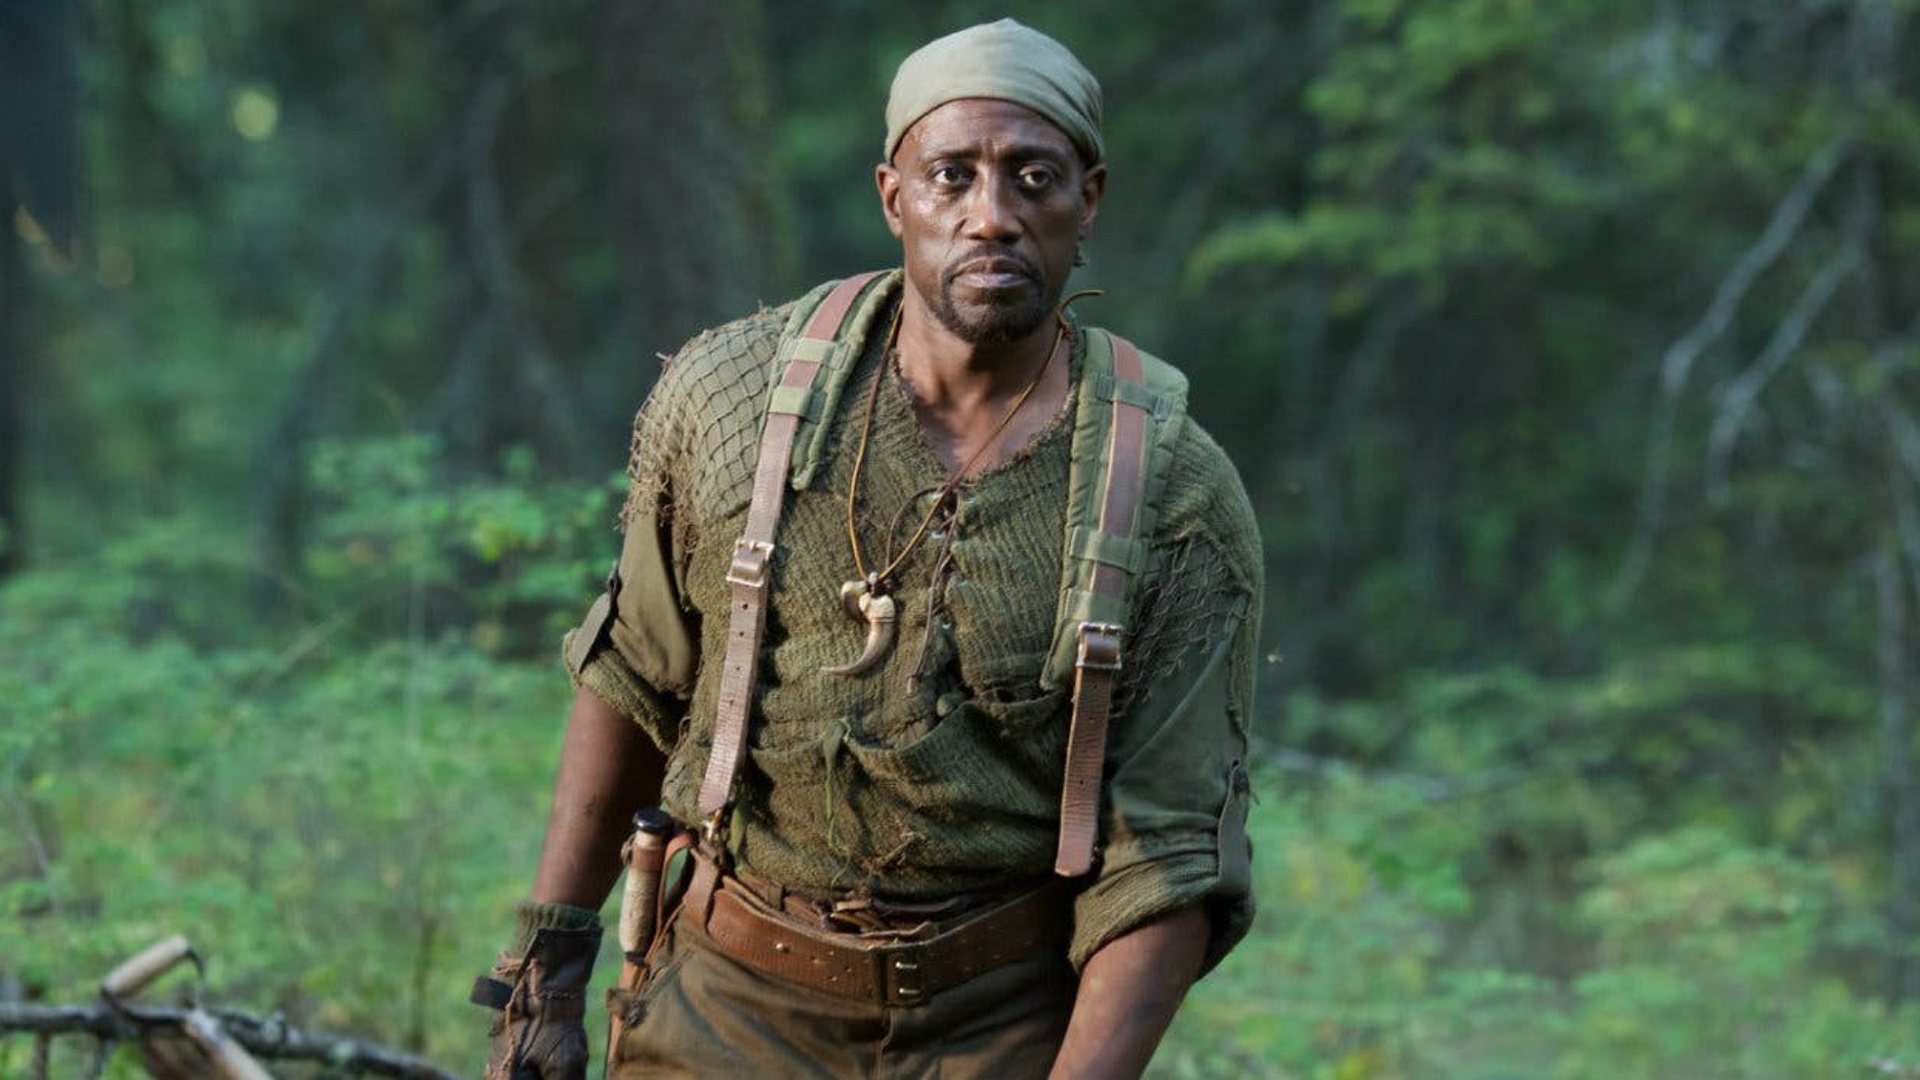 wesley snipes weight loss